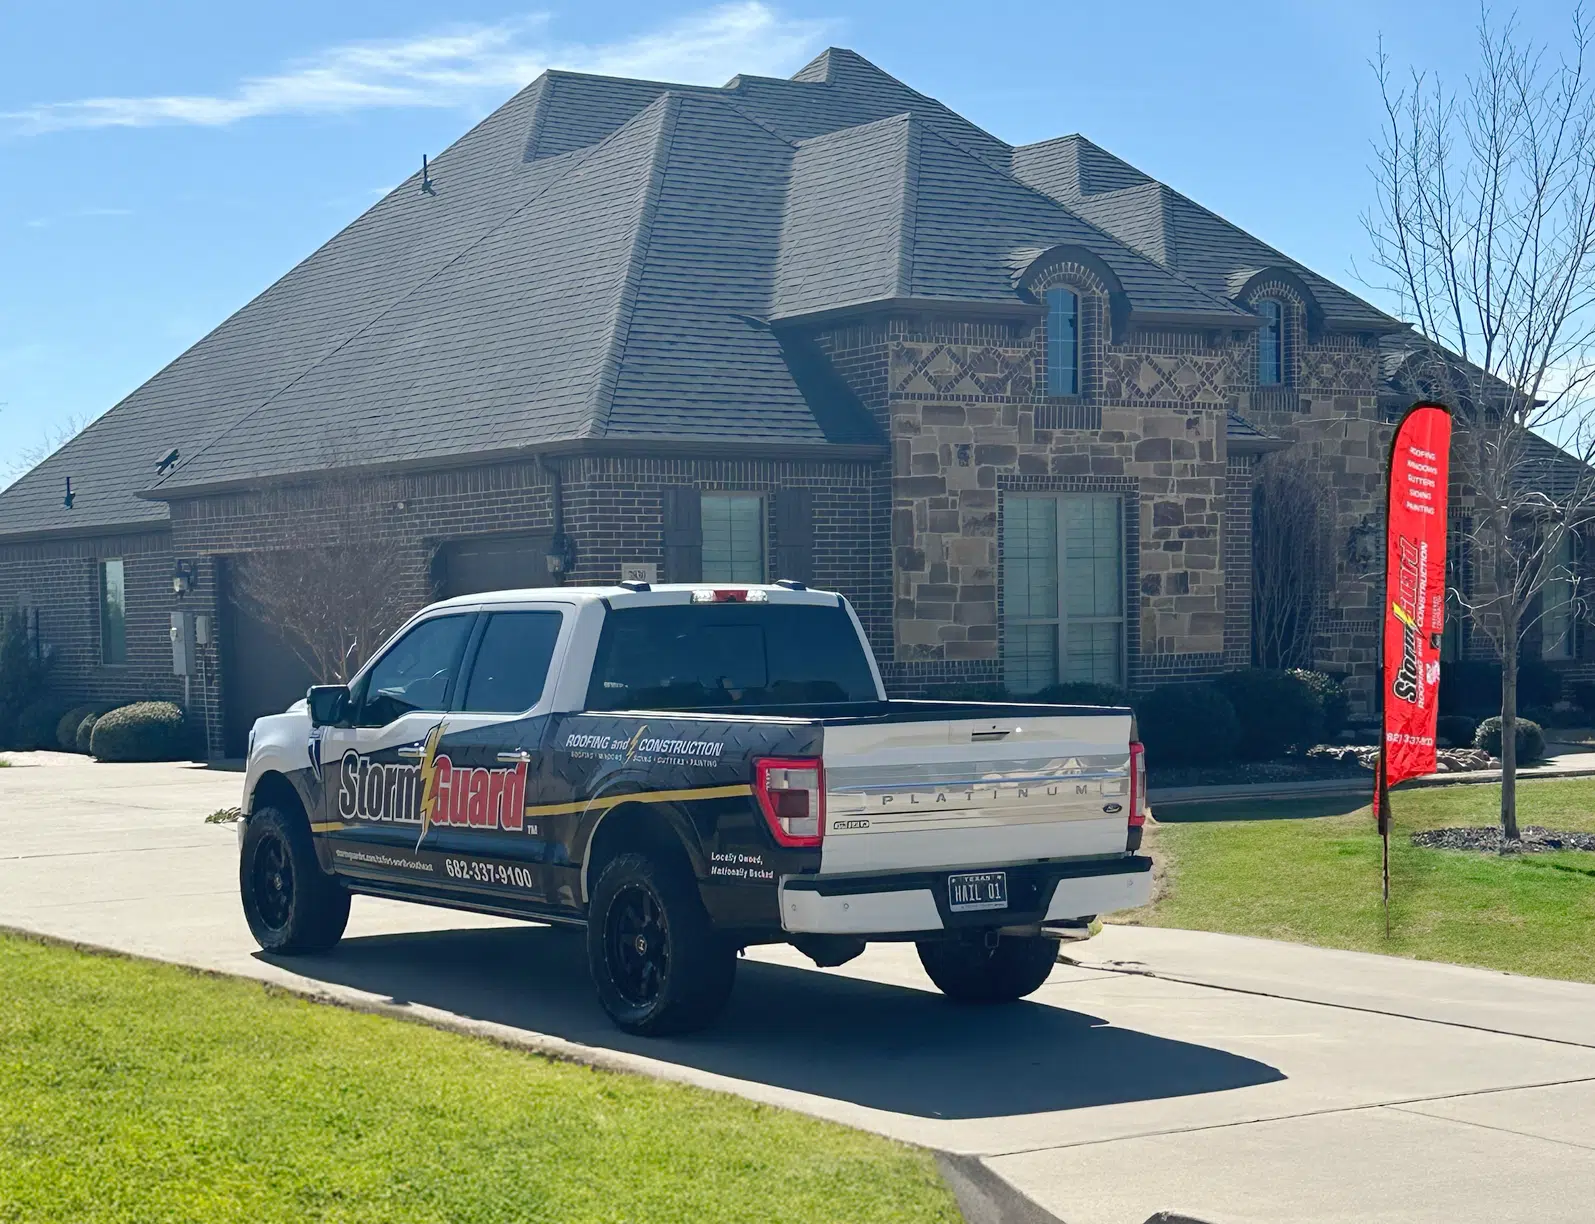 Brick House with Storm Guard Restoration Services Truck In Driveway - Forth Worth Southeast